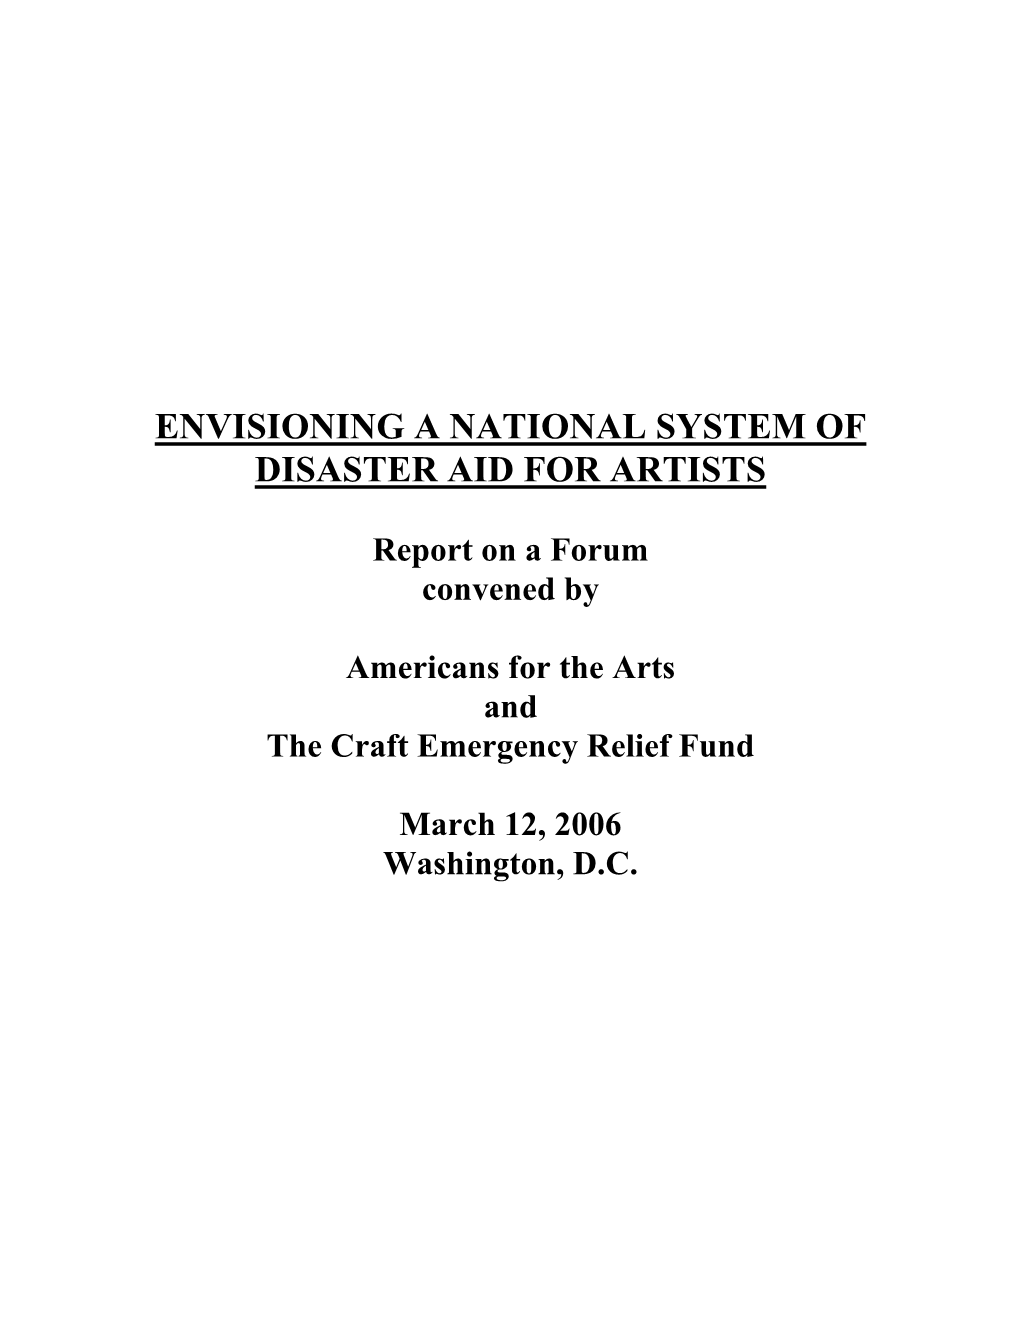 Envisioning a National System of Disaster Aid for Artists: Report on A